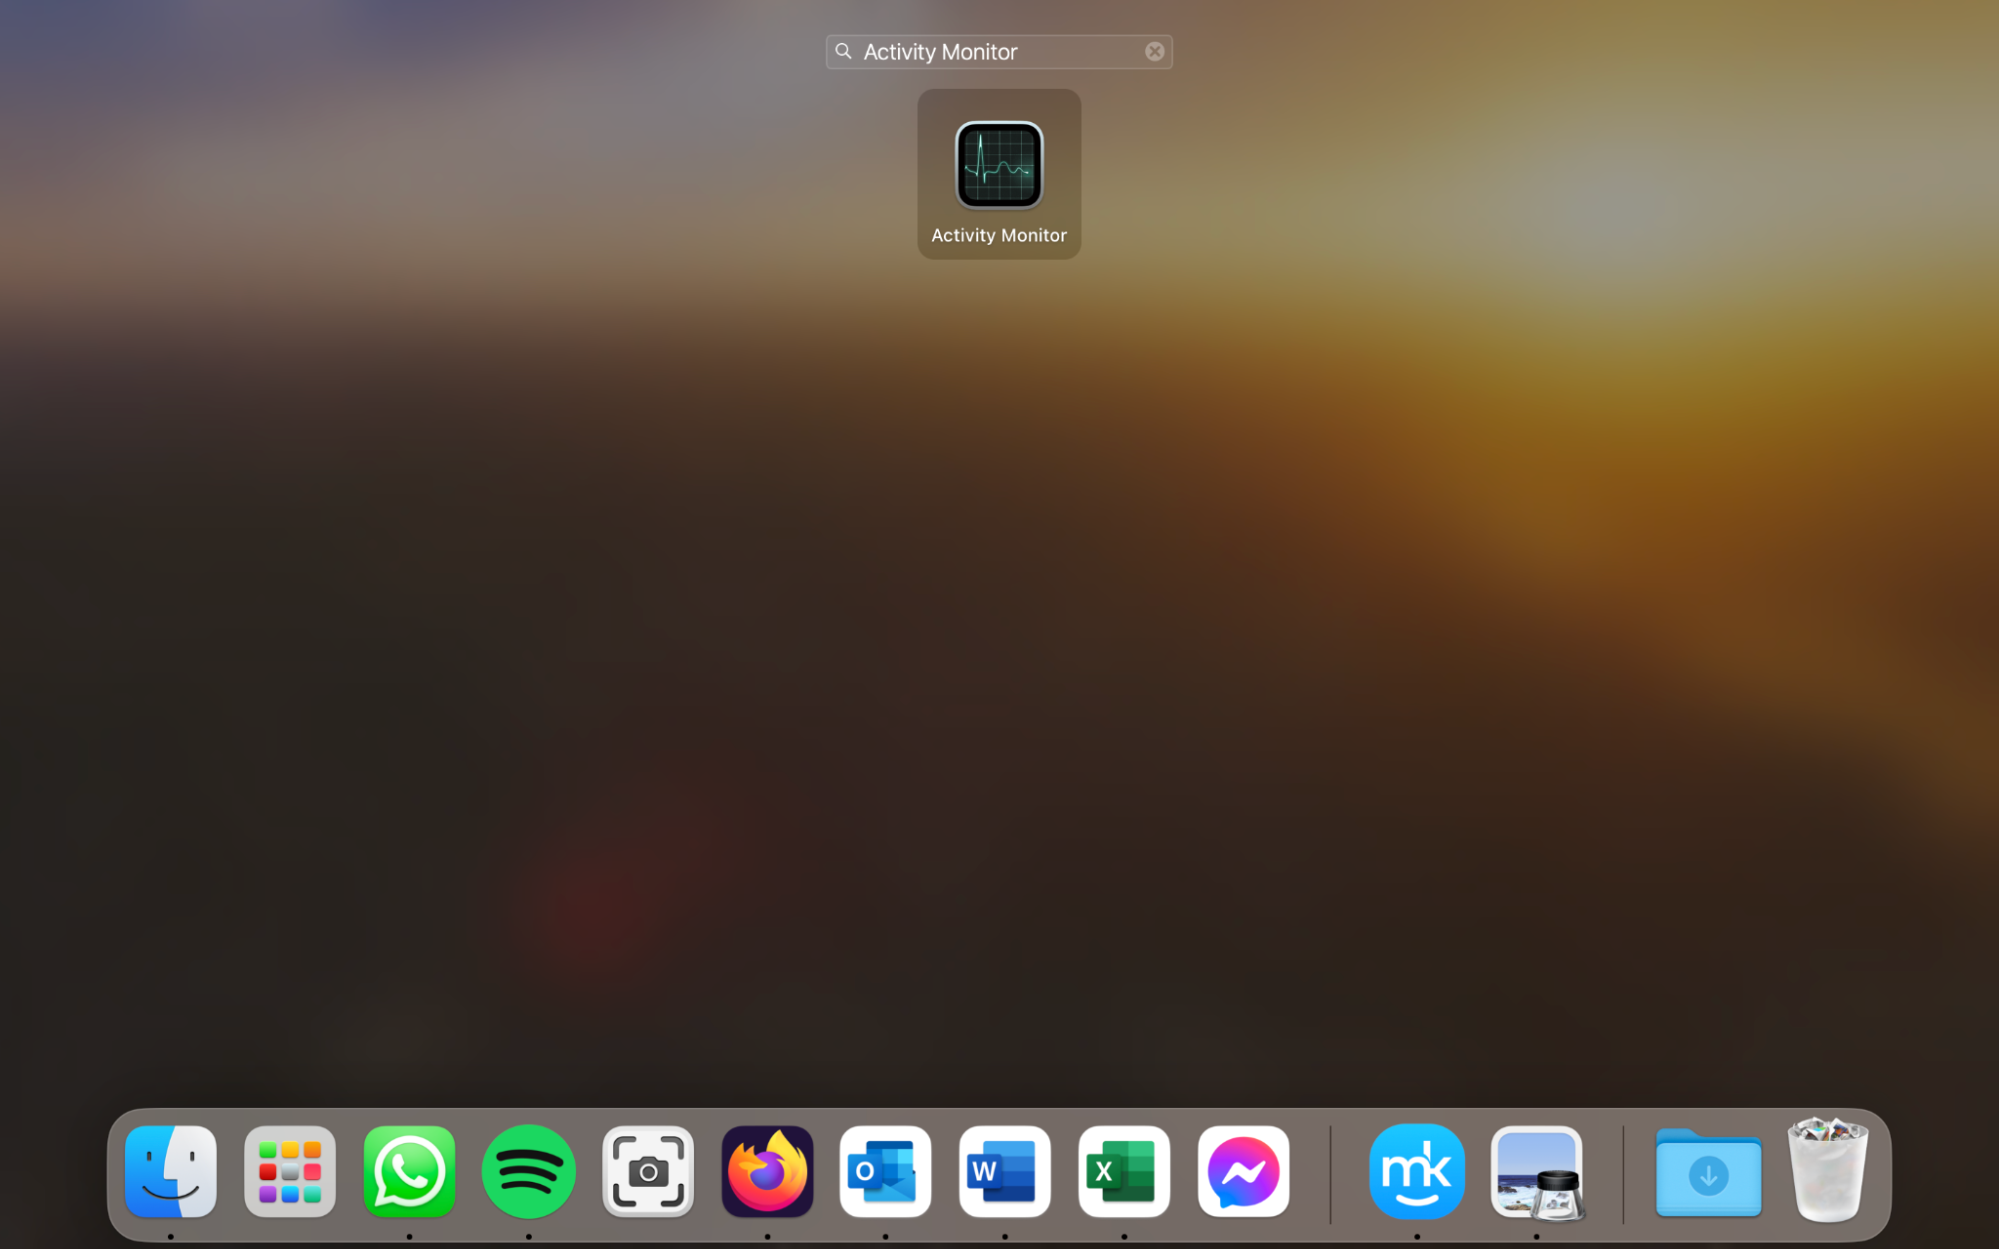 Mac’s Launchpad, with Activity Monitor shown, along with the Dock. How to manually remove a browser hijacker from Mac: stop the browser hijacker process.